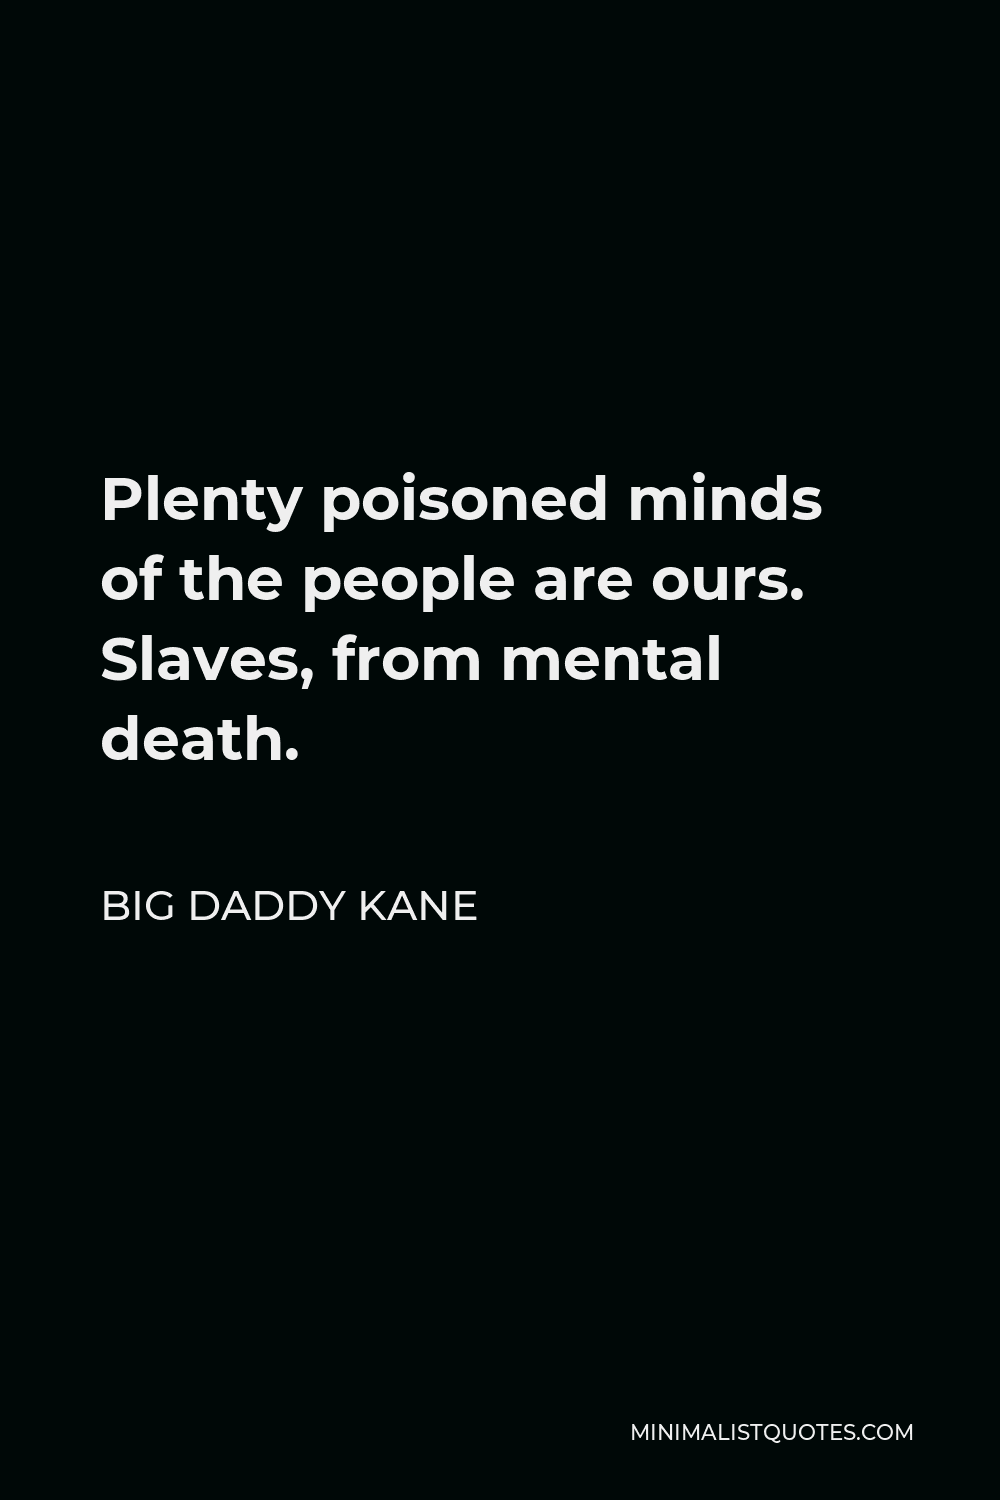 Big Daddy Kane Quote - Plenty poisoned minds of the people are ours. Slaves, from mental death.